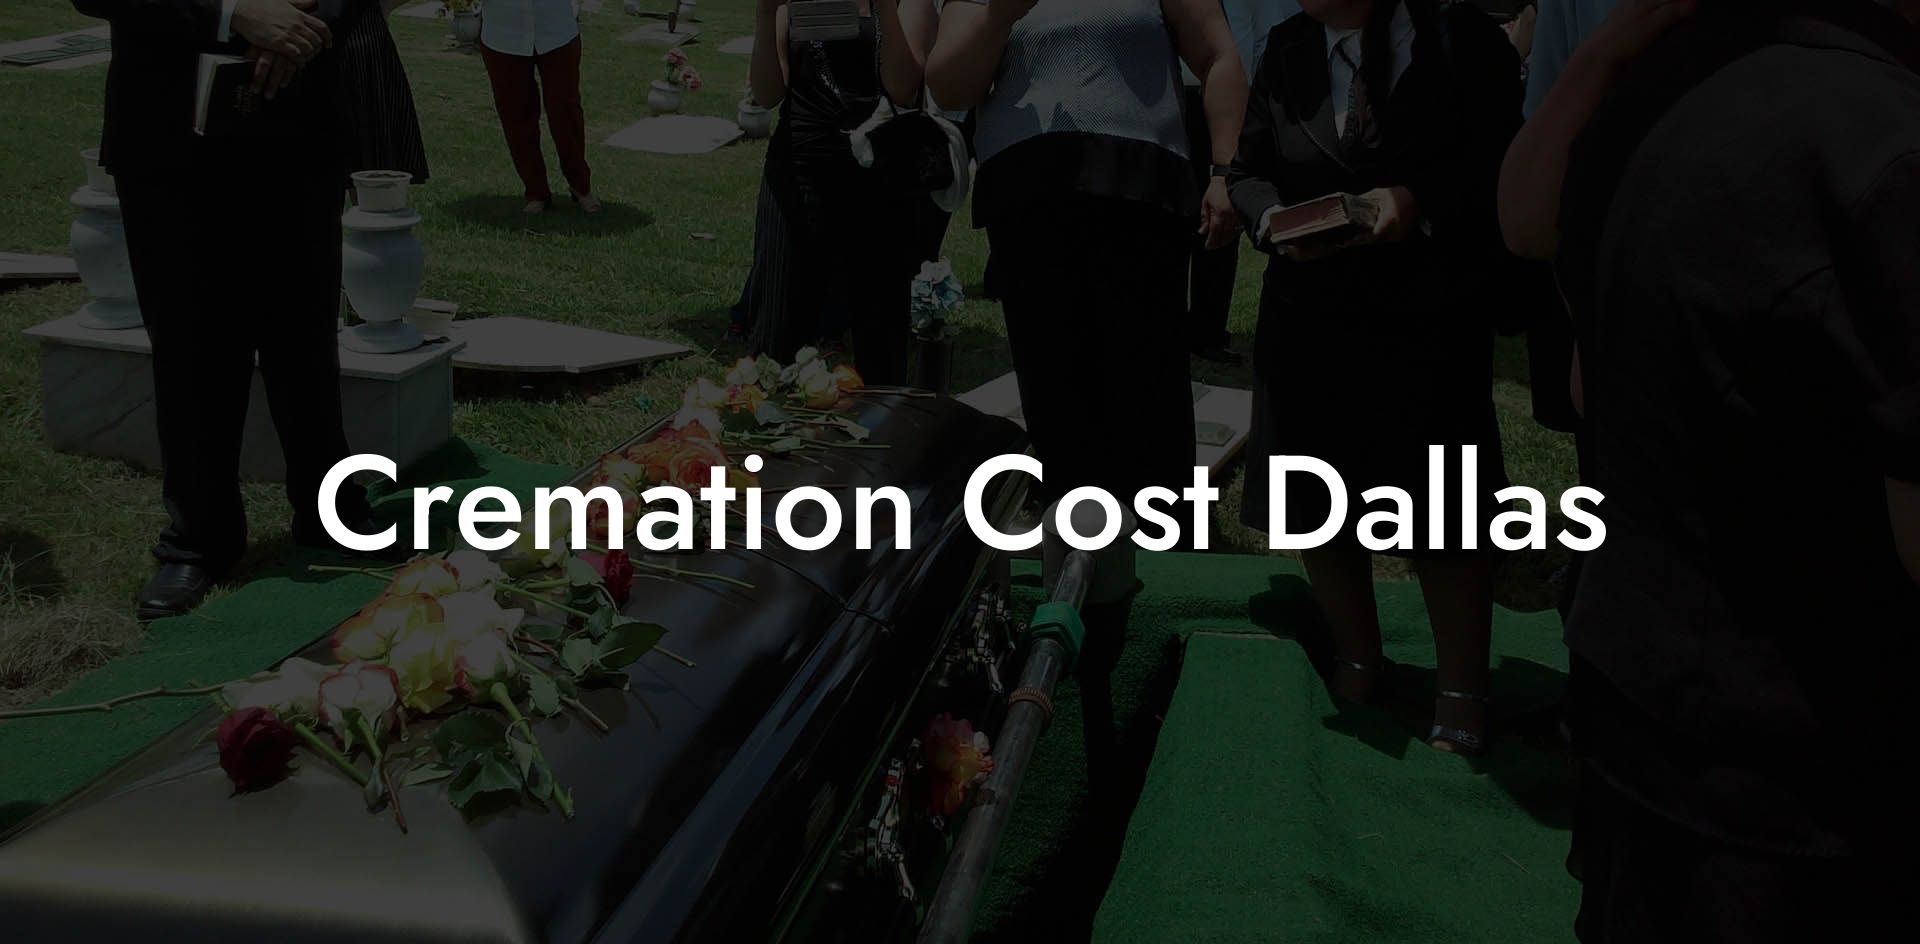 Cremation Cost Dallas Eulogy Assistant 